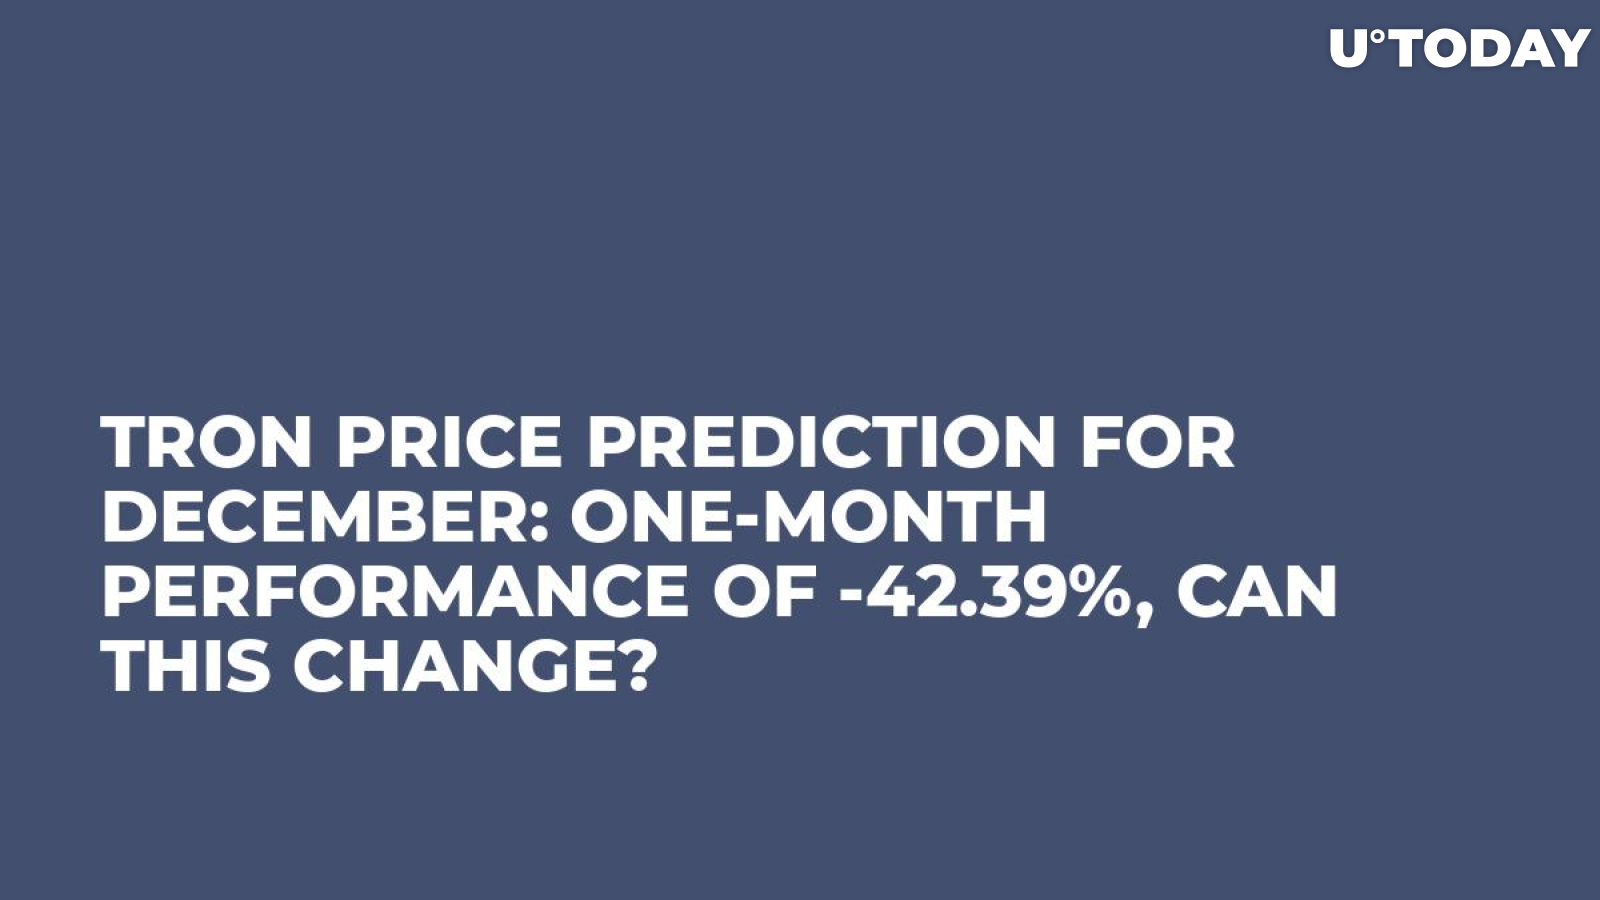 Tron Price Prediction for December: One-Month Performance of -42.39%, Can This Change?